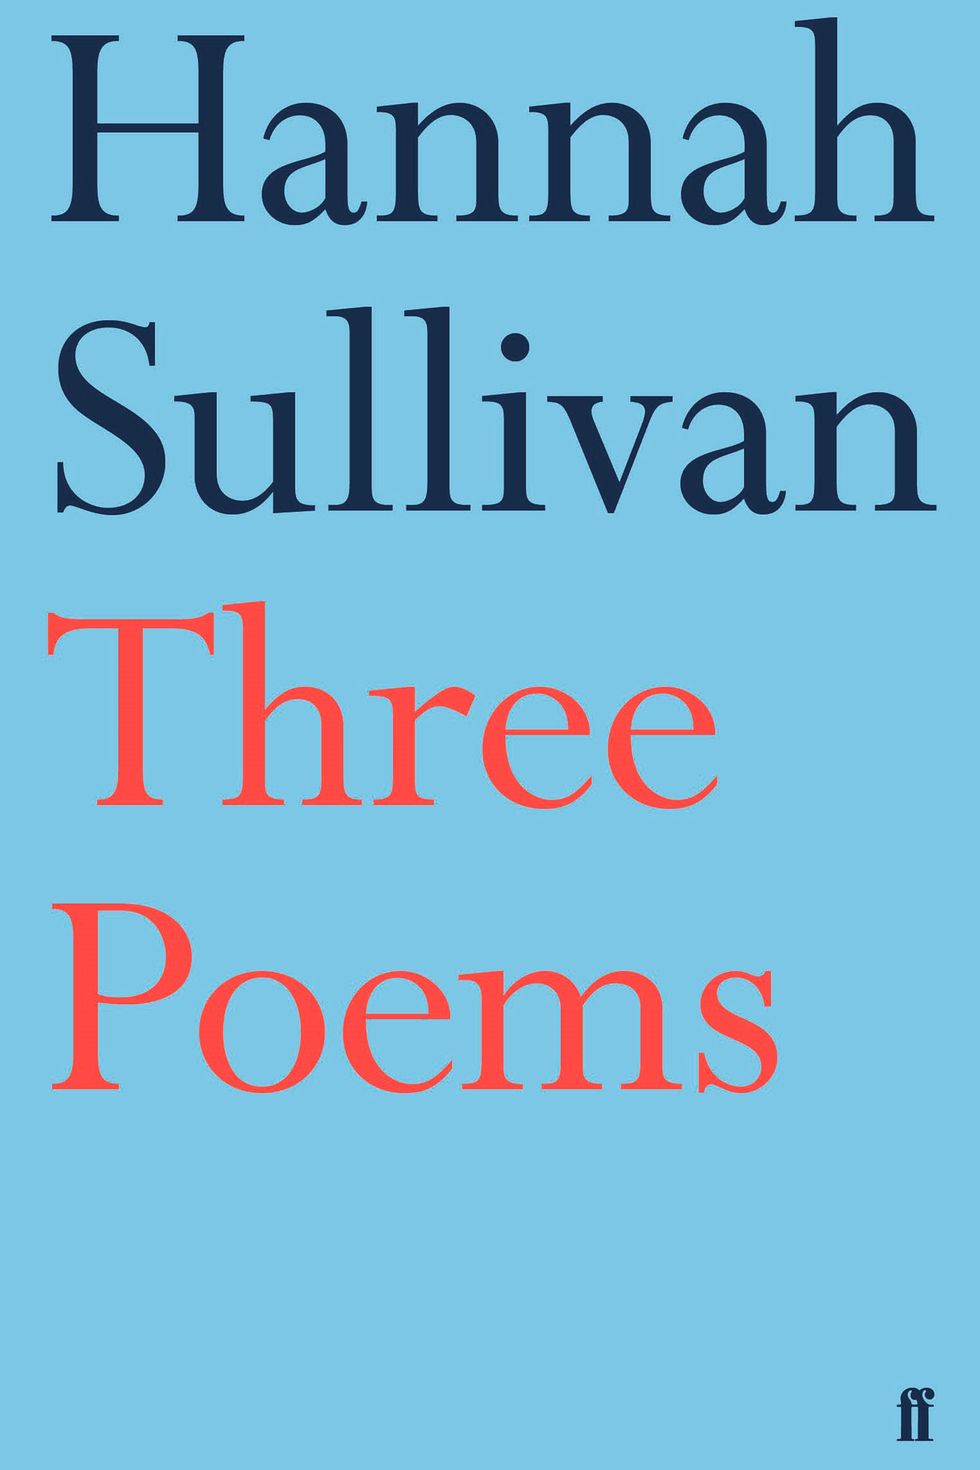 The cover of Hannah Sullivan's winning collection, 'Three Poems'